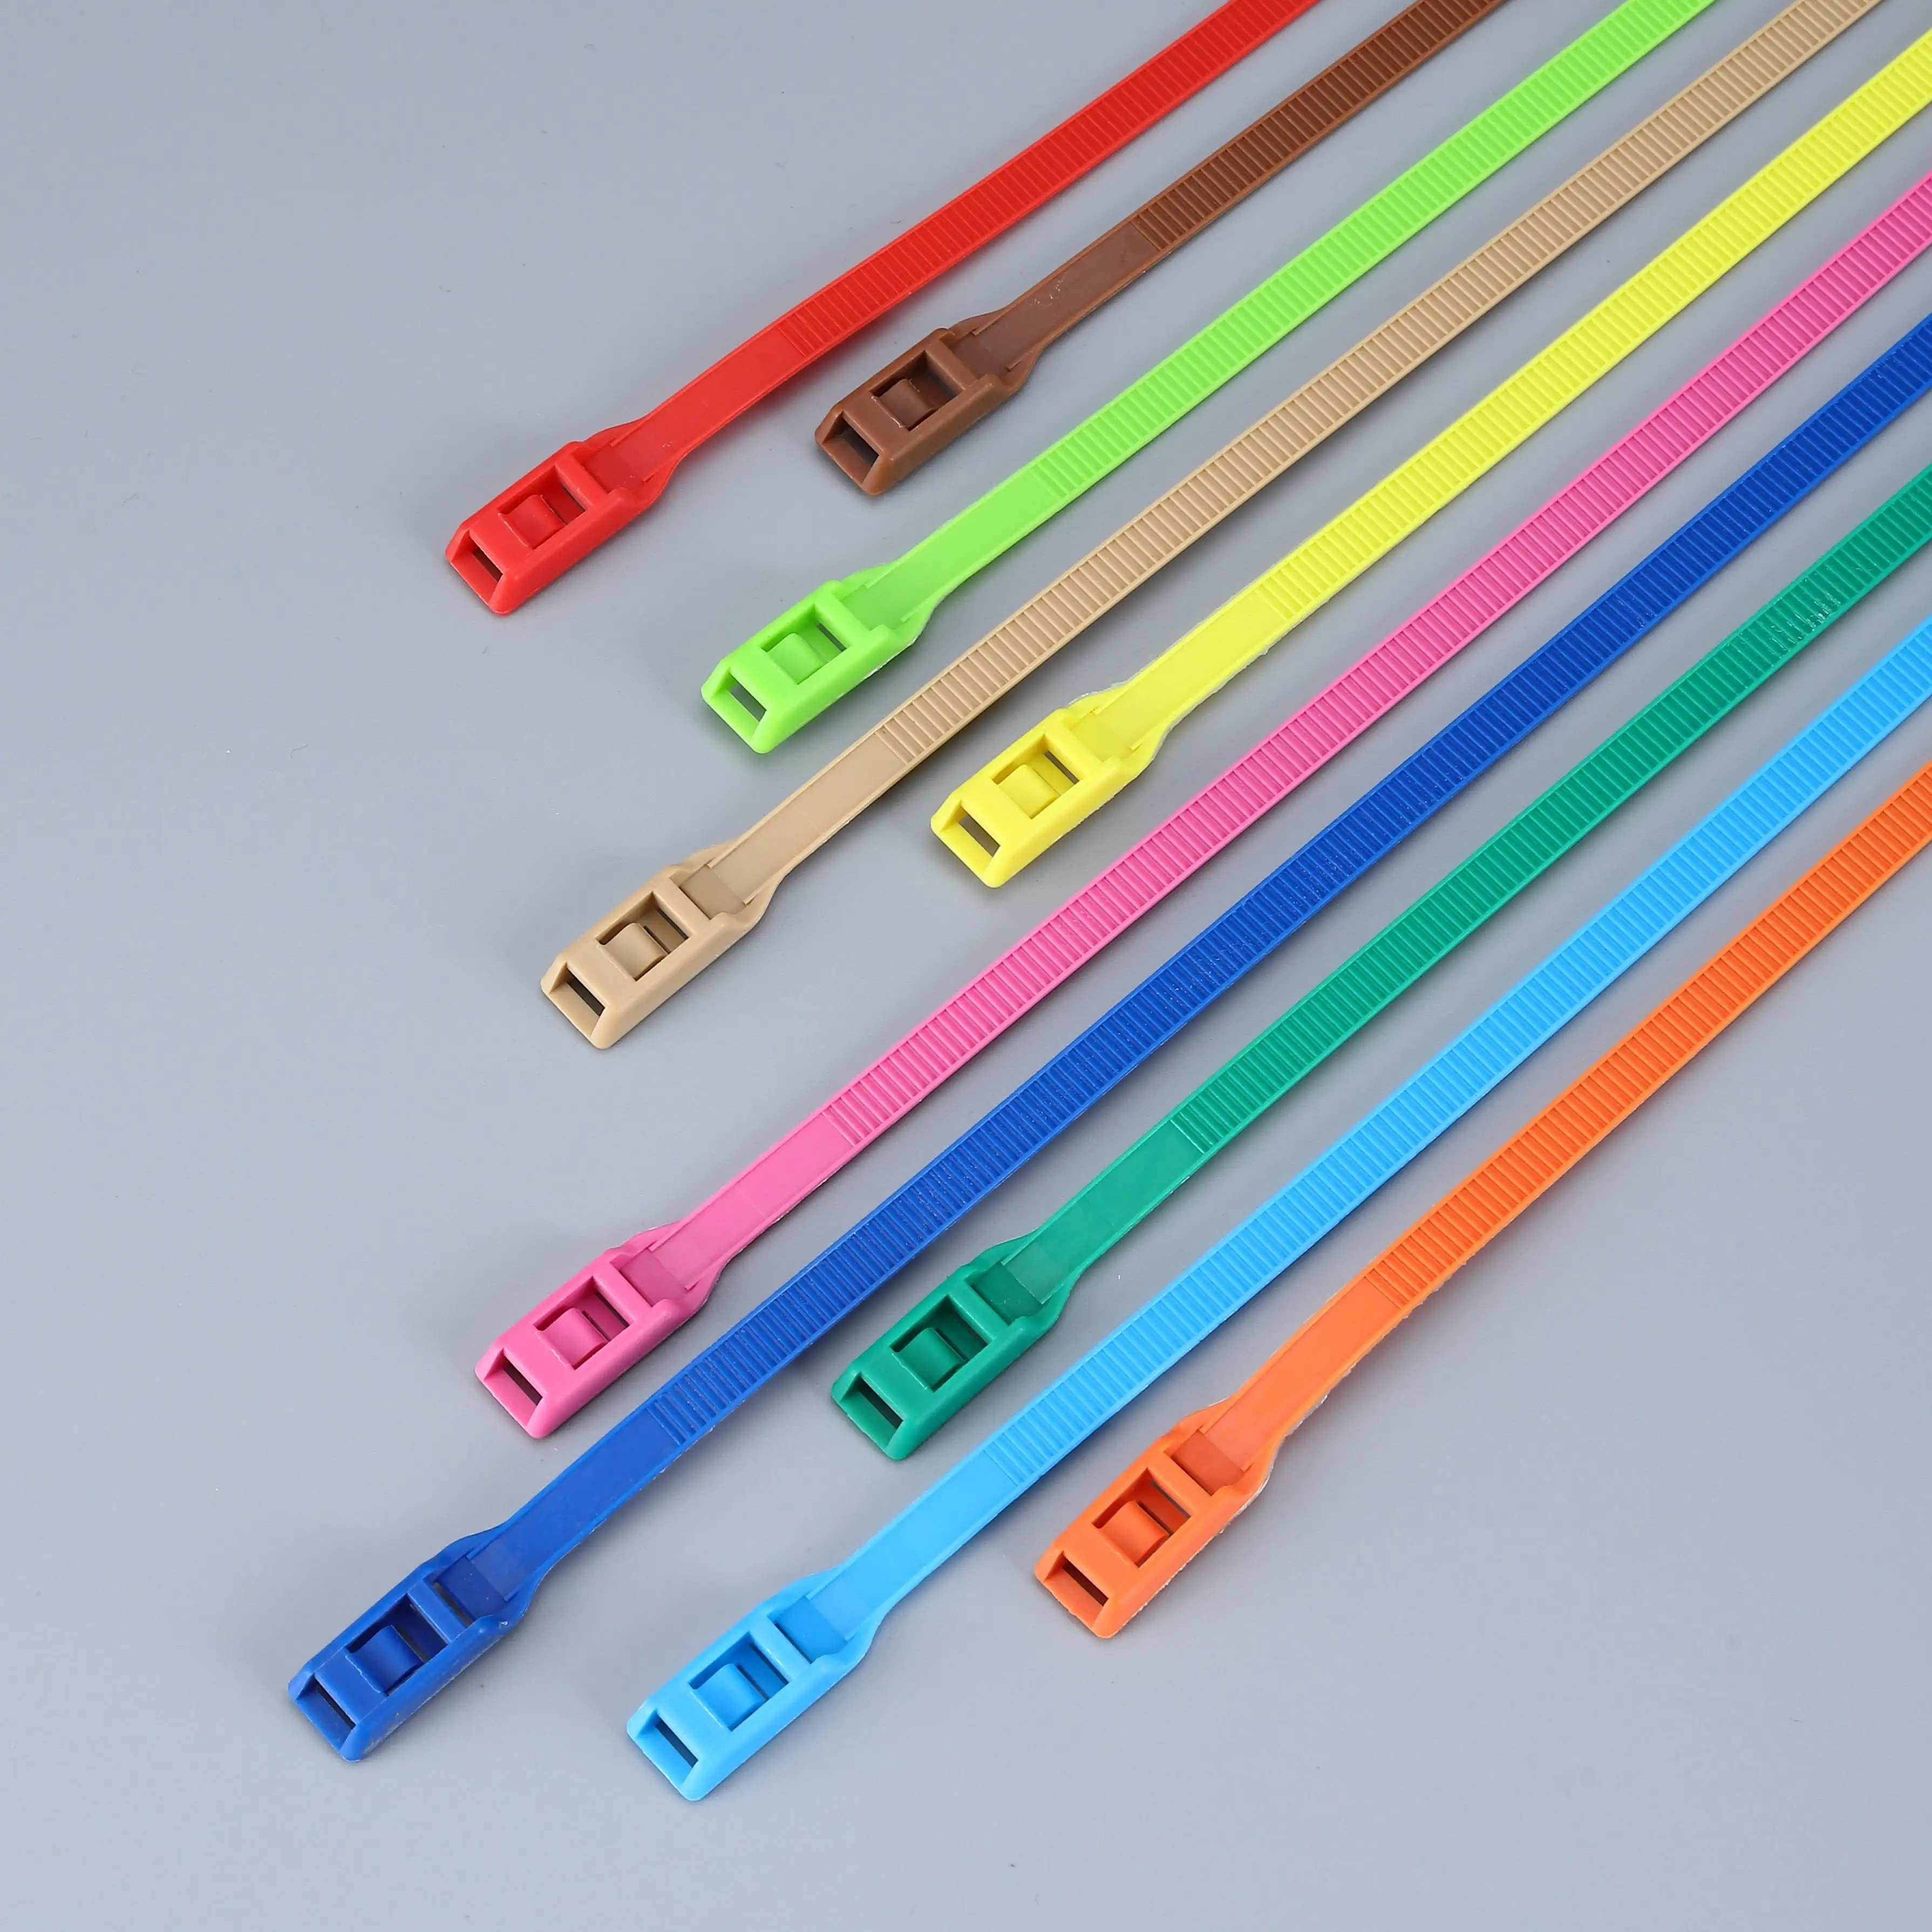 Factory Directly Provide High Quality Releasable Naughty Fort Cable Ties